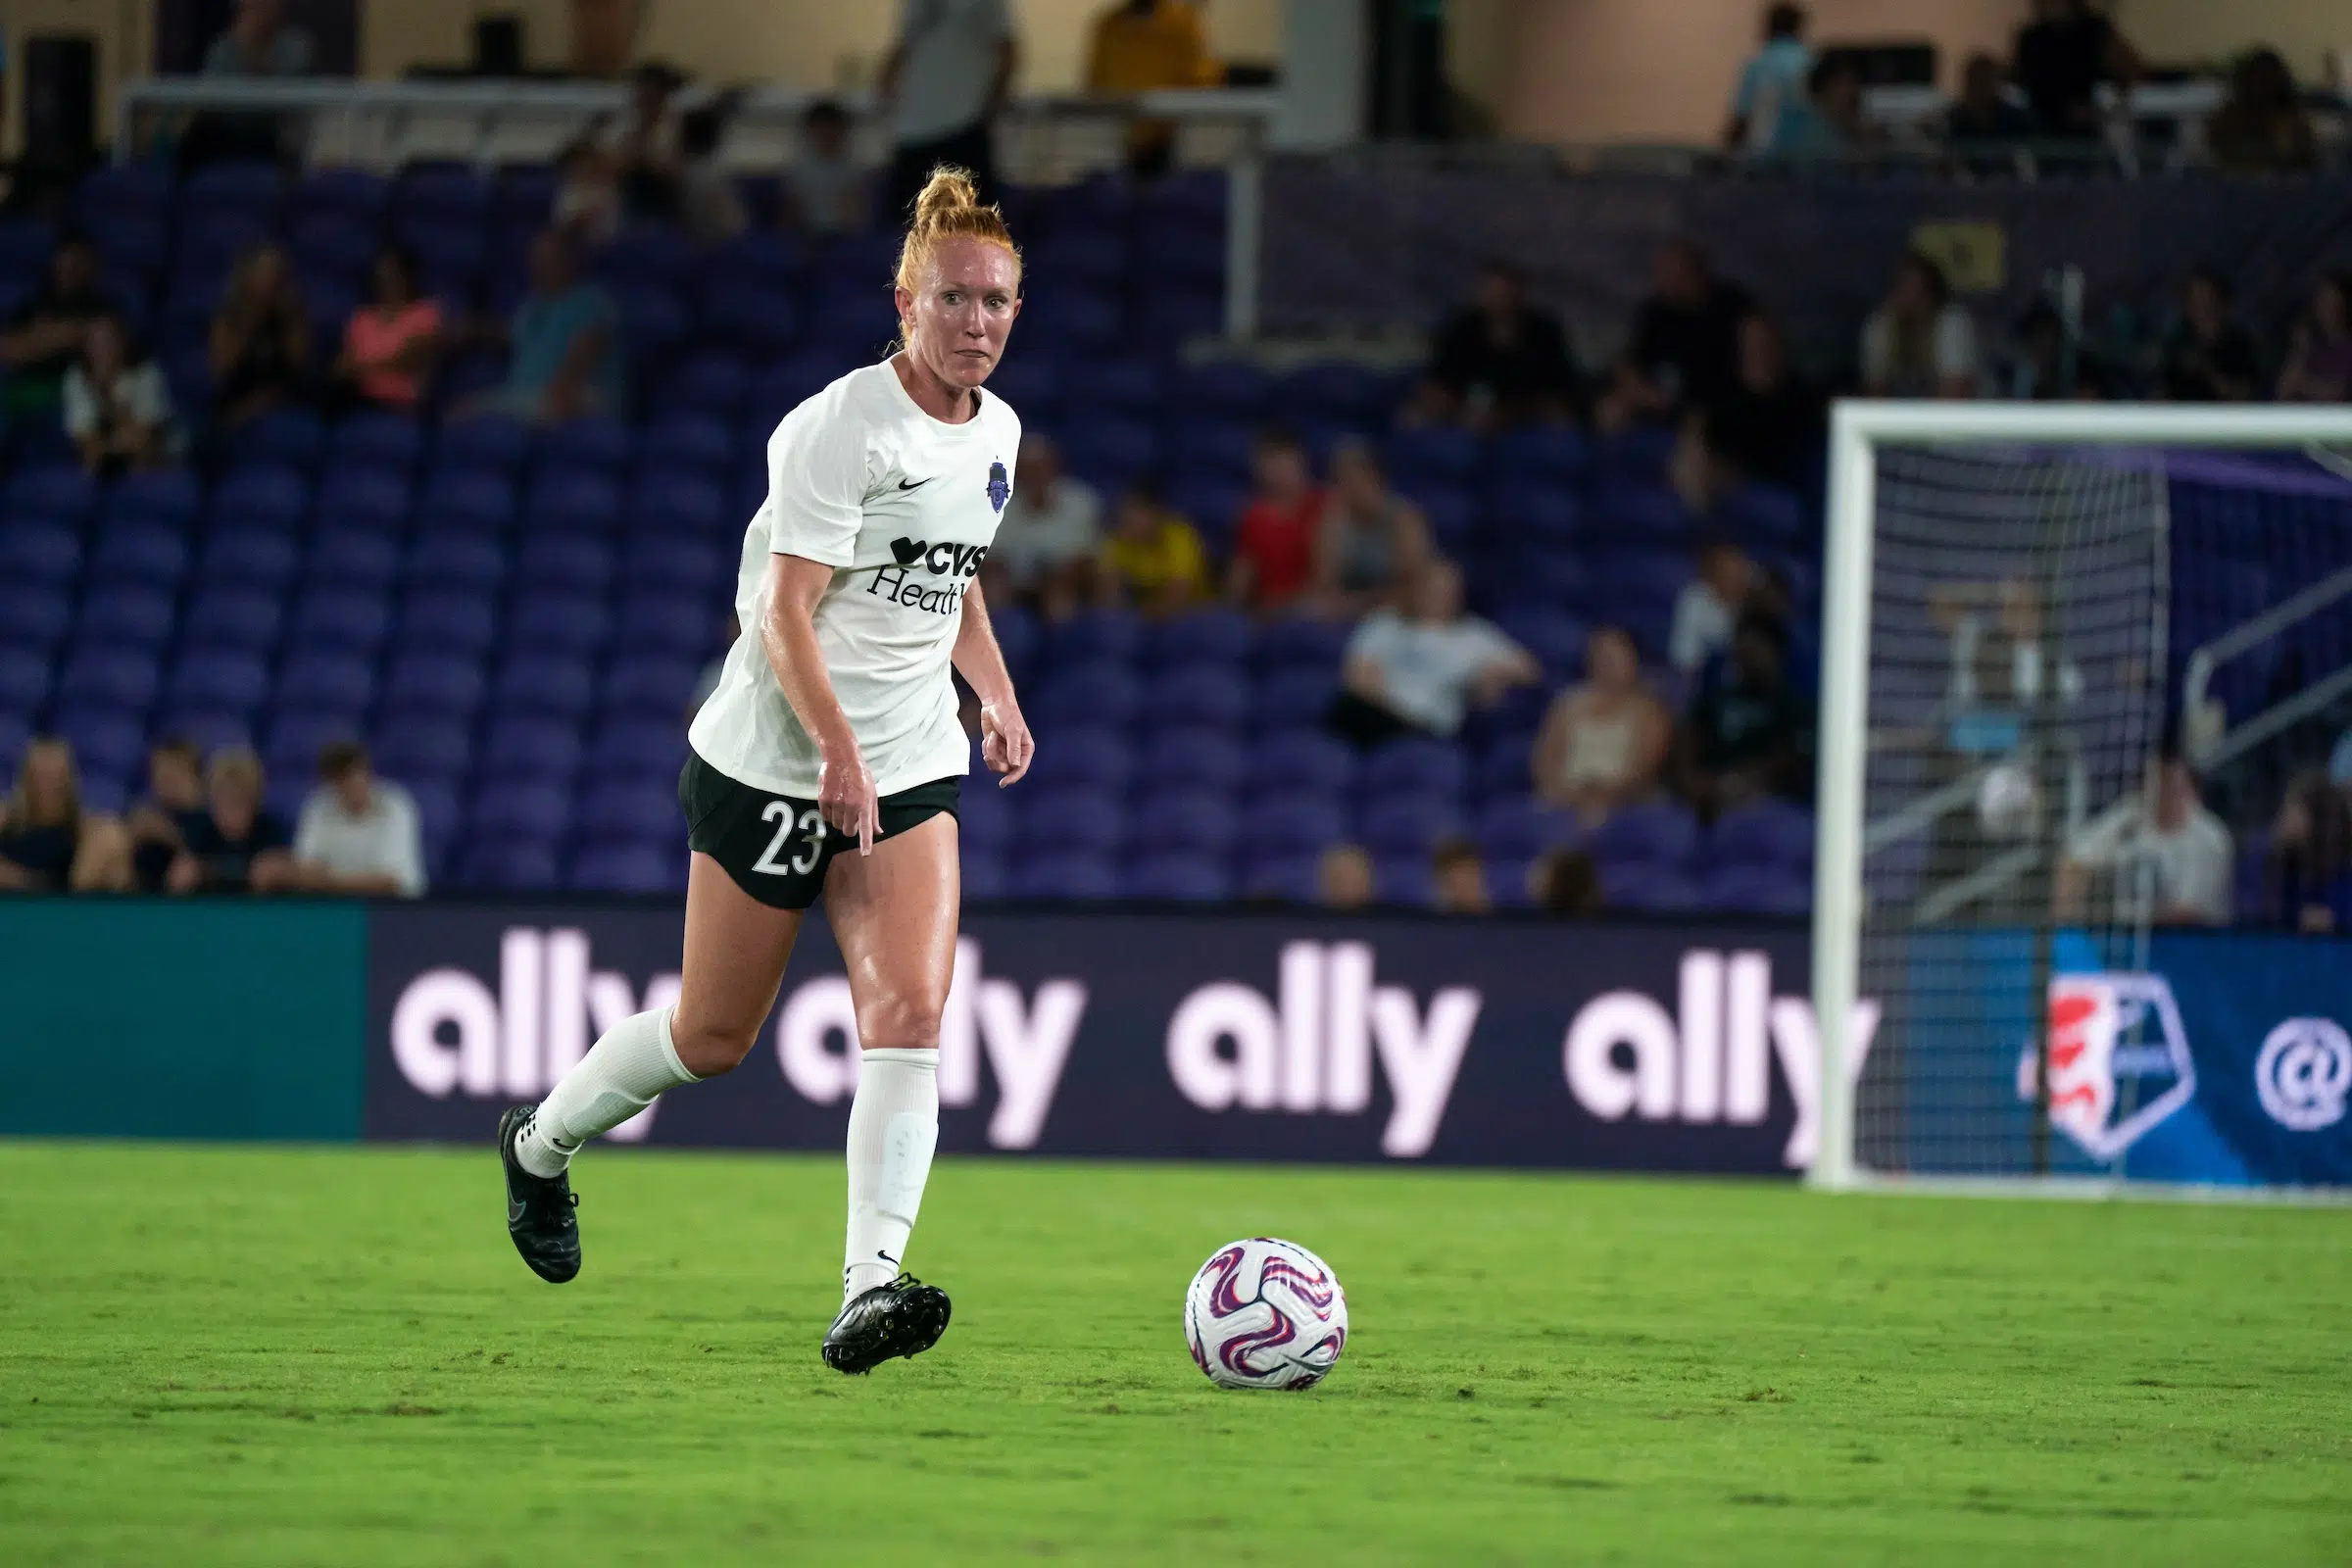 Tori Huster in a white top, black shorts and white socks dribbles a soccer ball.